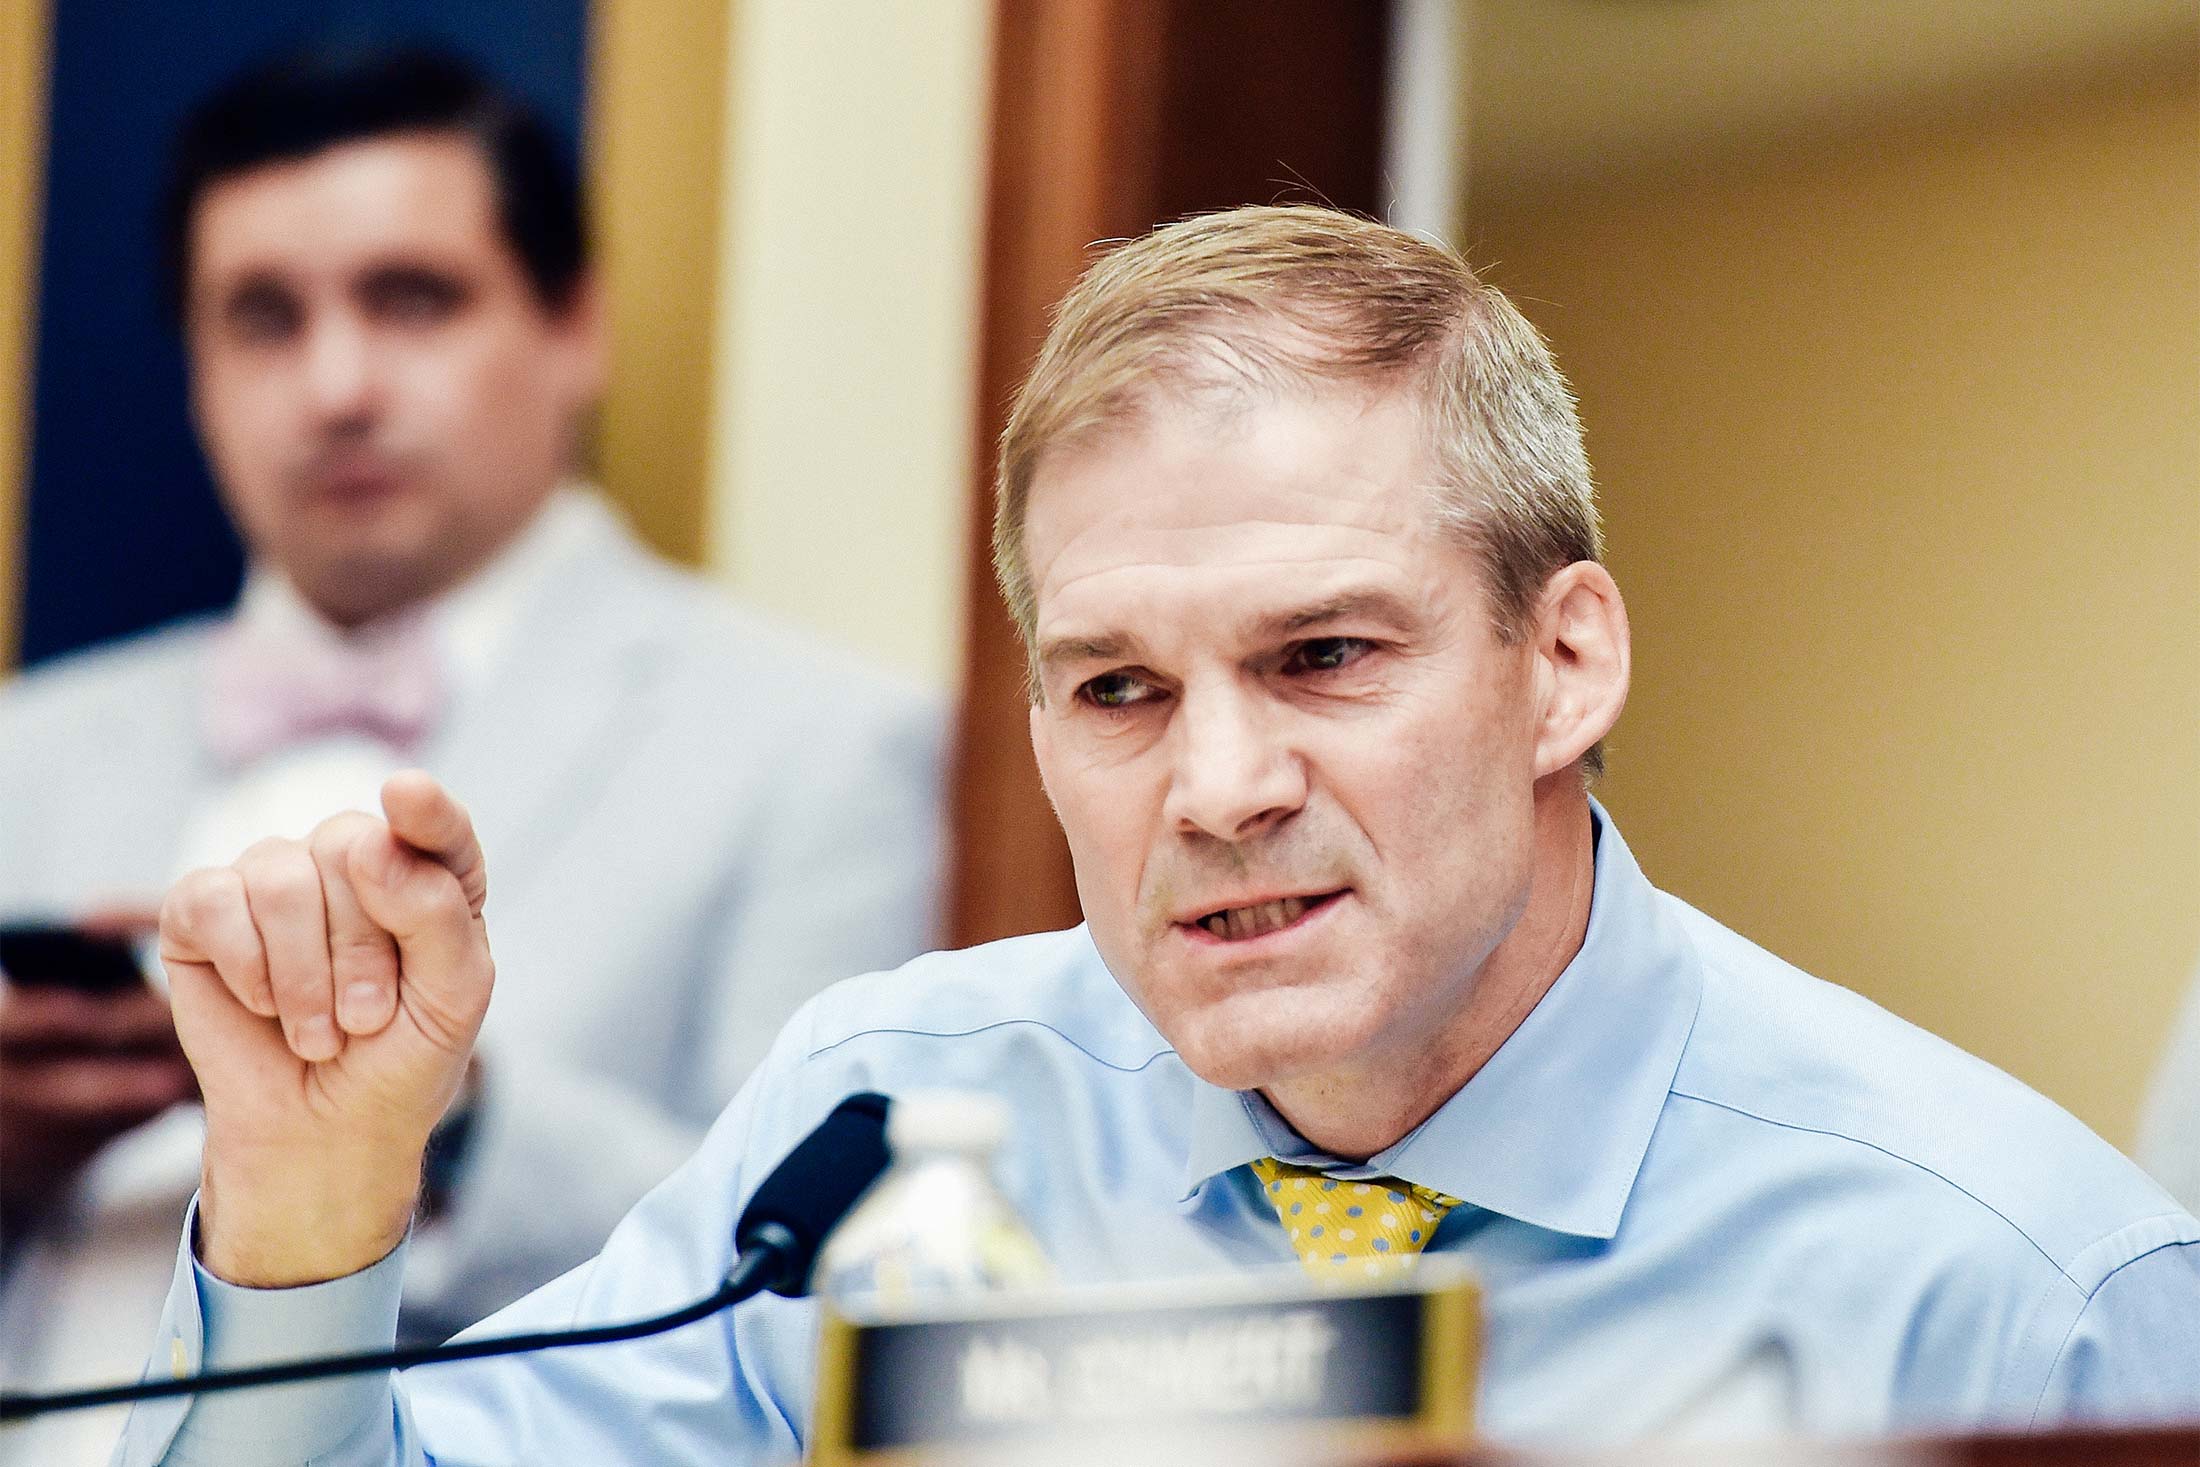 Jim Jordan speaks into a microphone at a hearing.